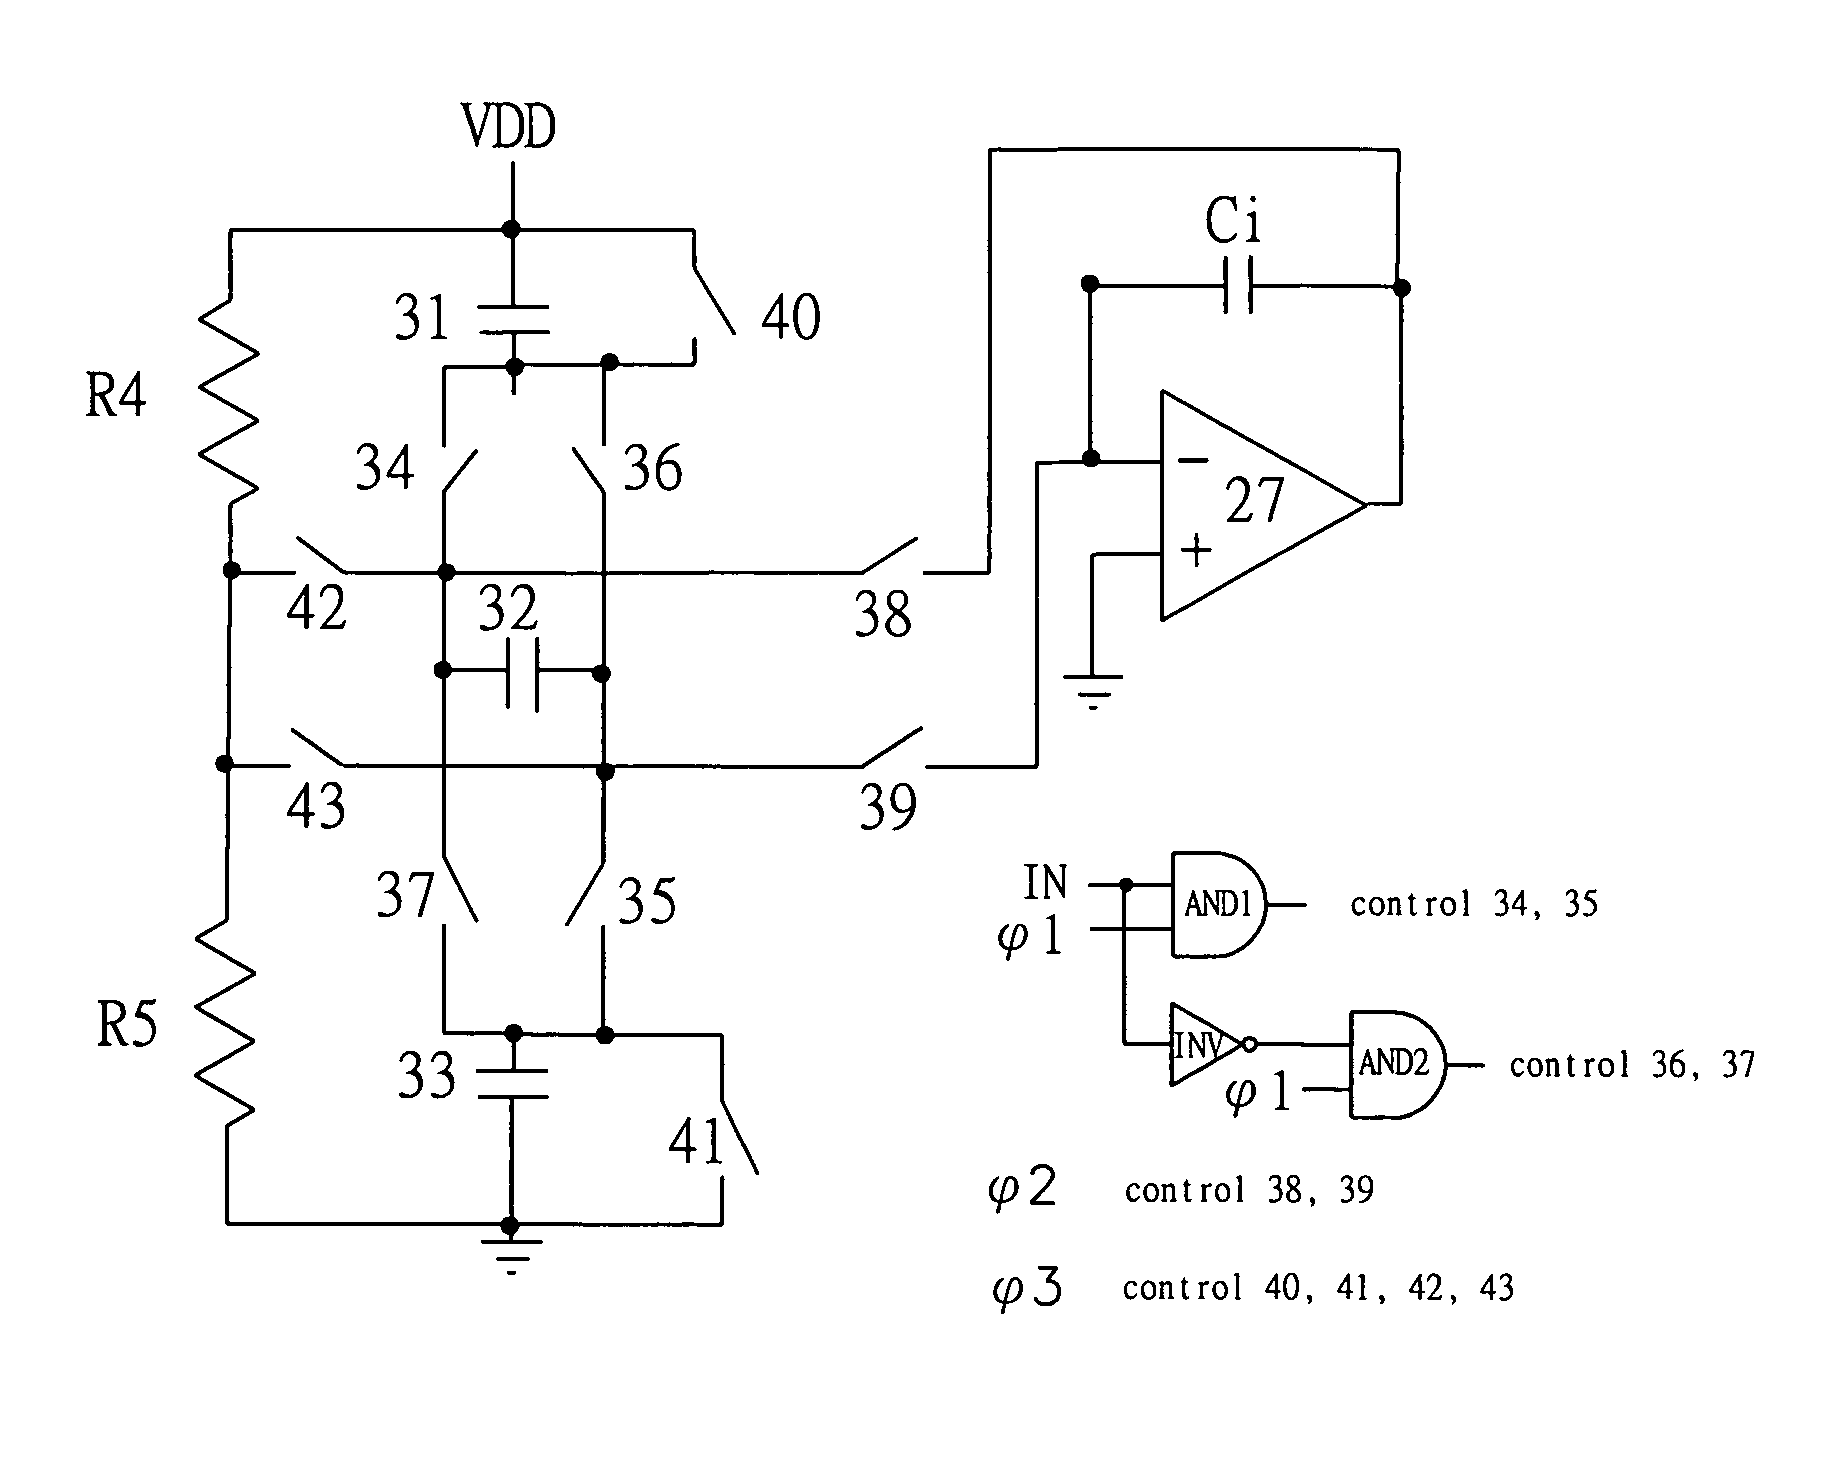 Circuit for using capacitor voltage divider in a delta-sigma digital-to-analog converter to generate reference voltage